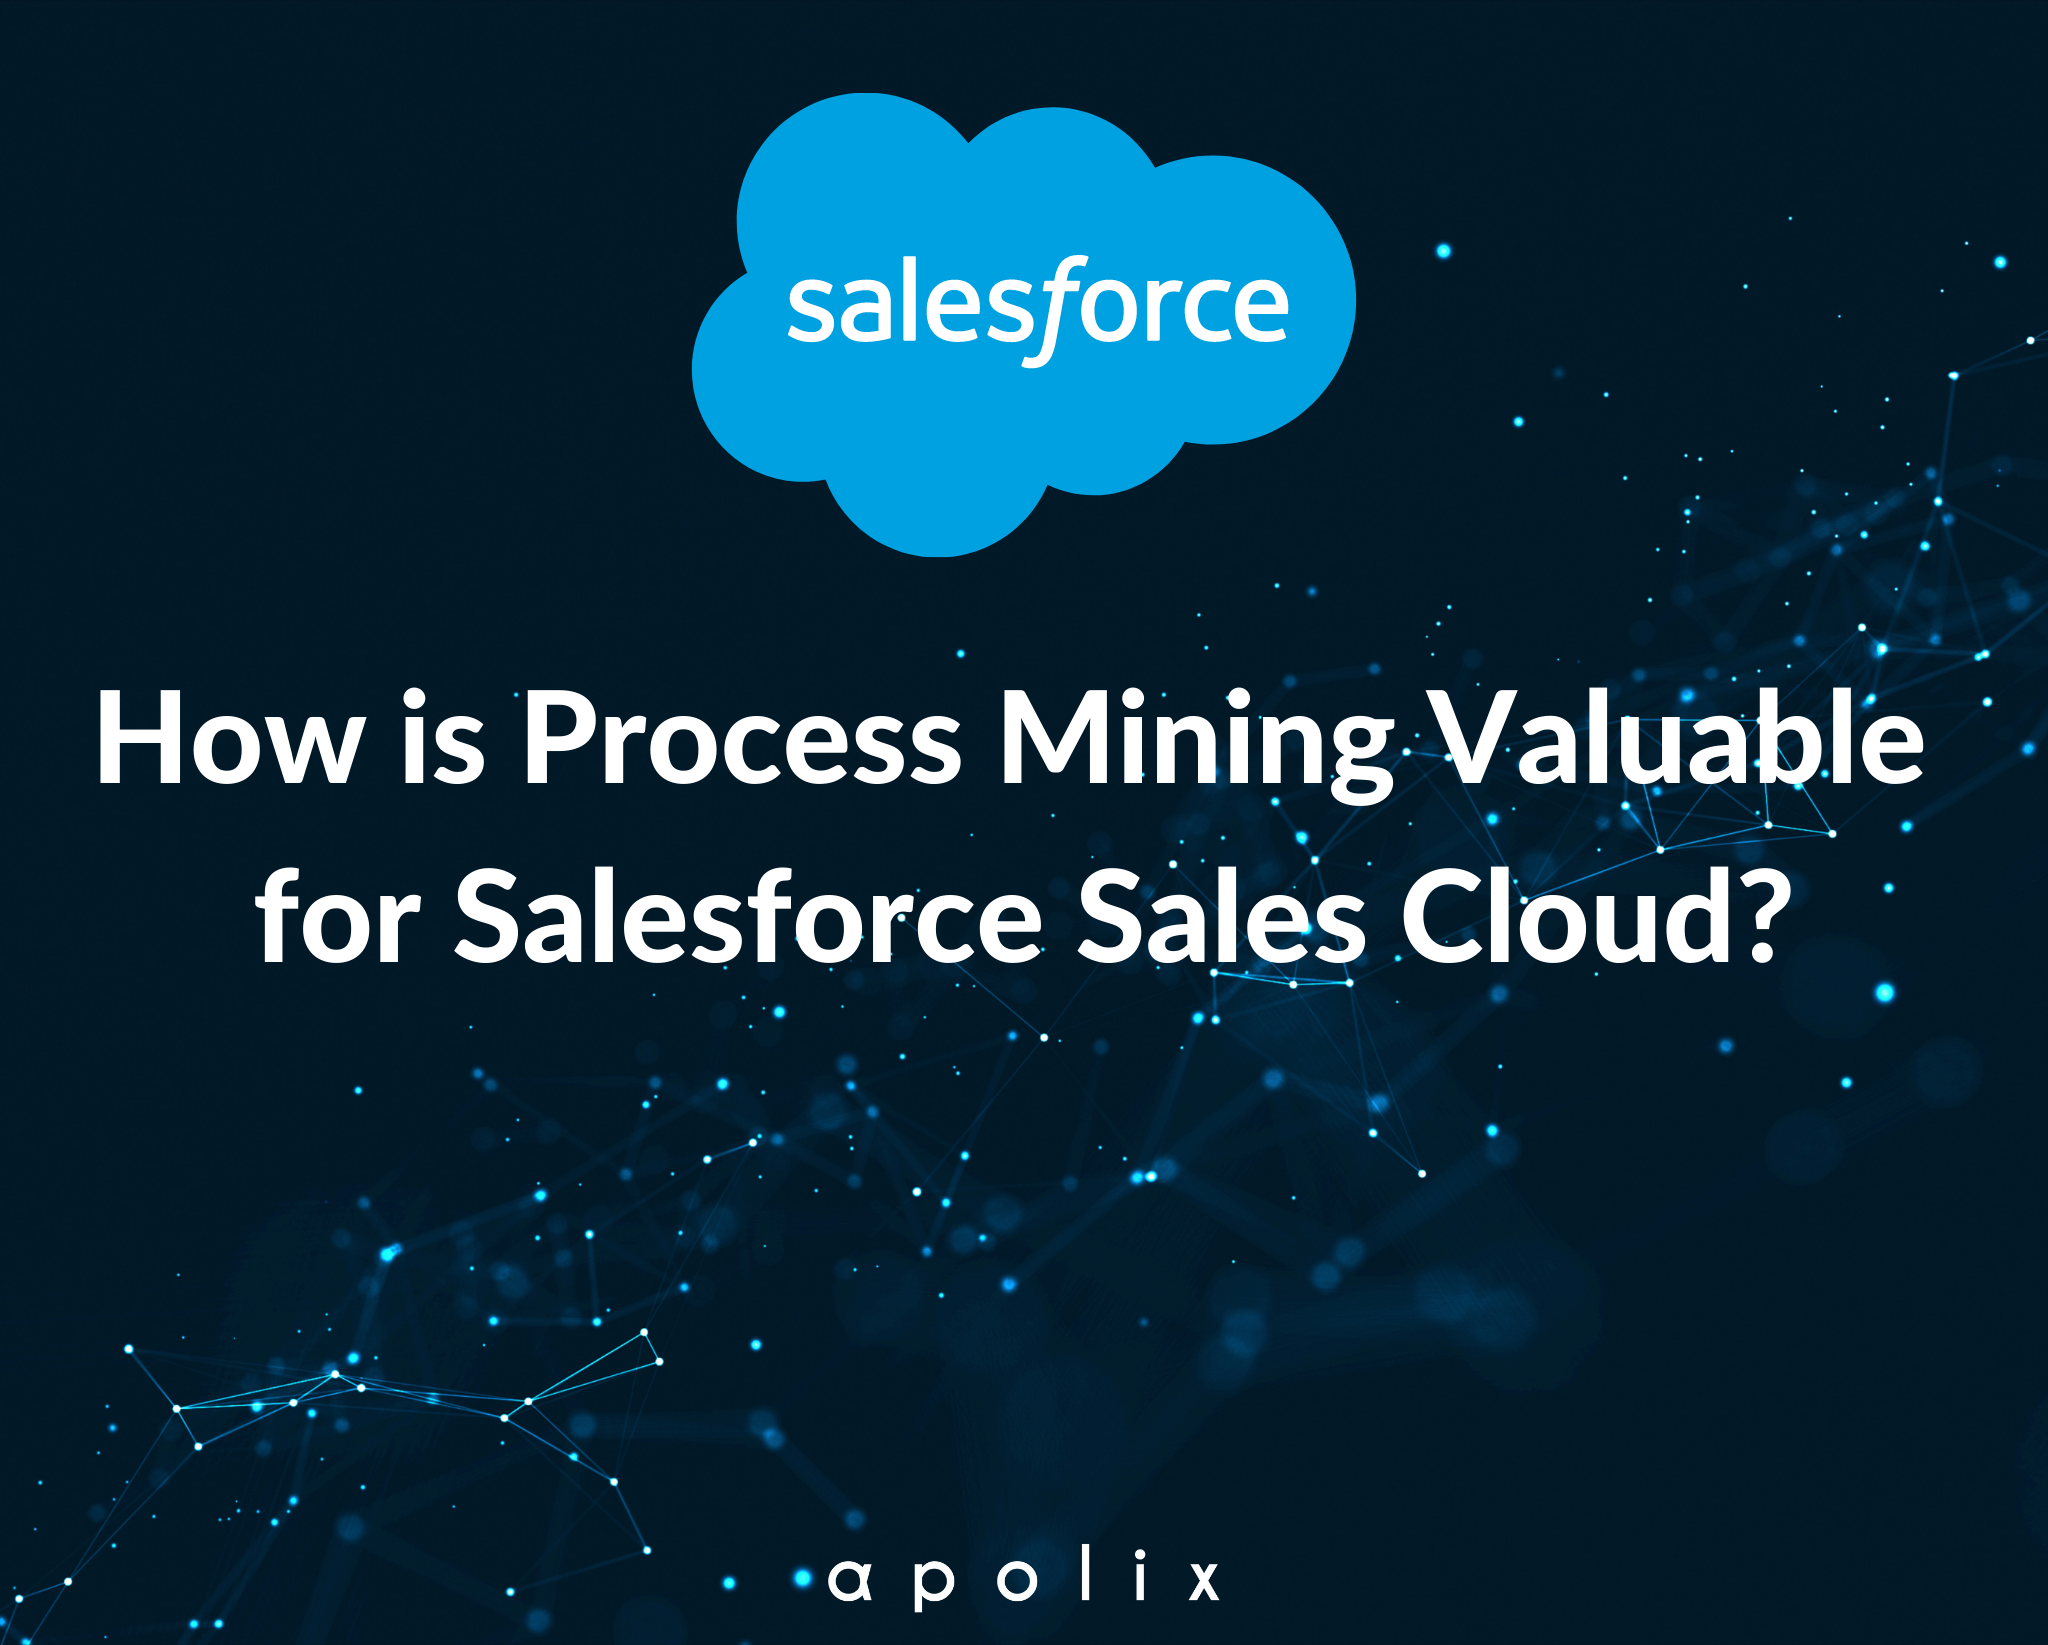 How is Process Mining Valuable for Salesforce Sales Cloud?